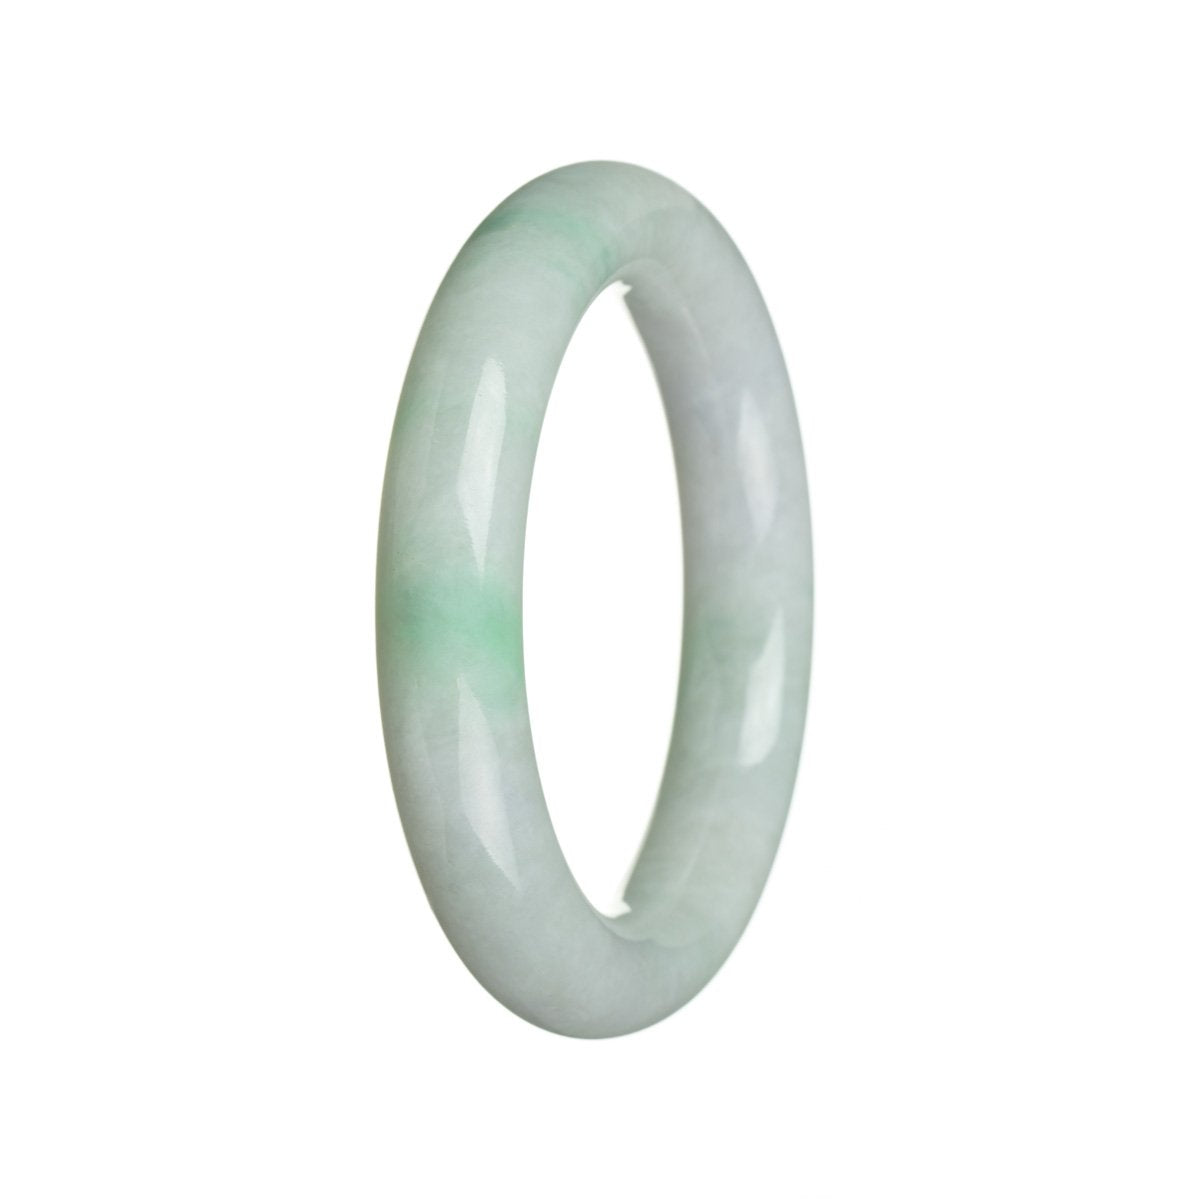 A round untreated green jadeite jade bangle with a 56mm diameter, certified by MAYS GEMS.